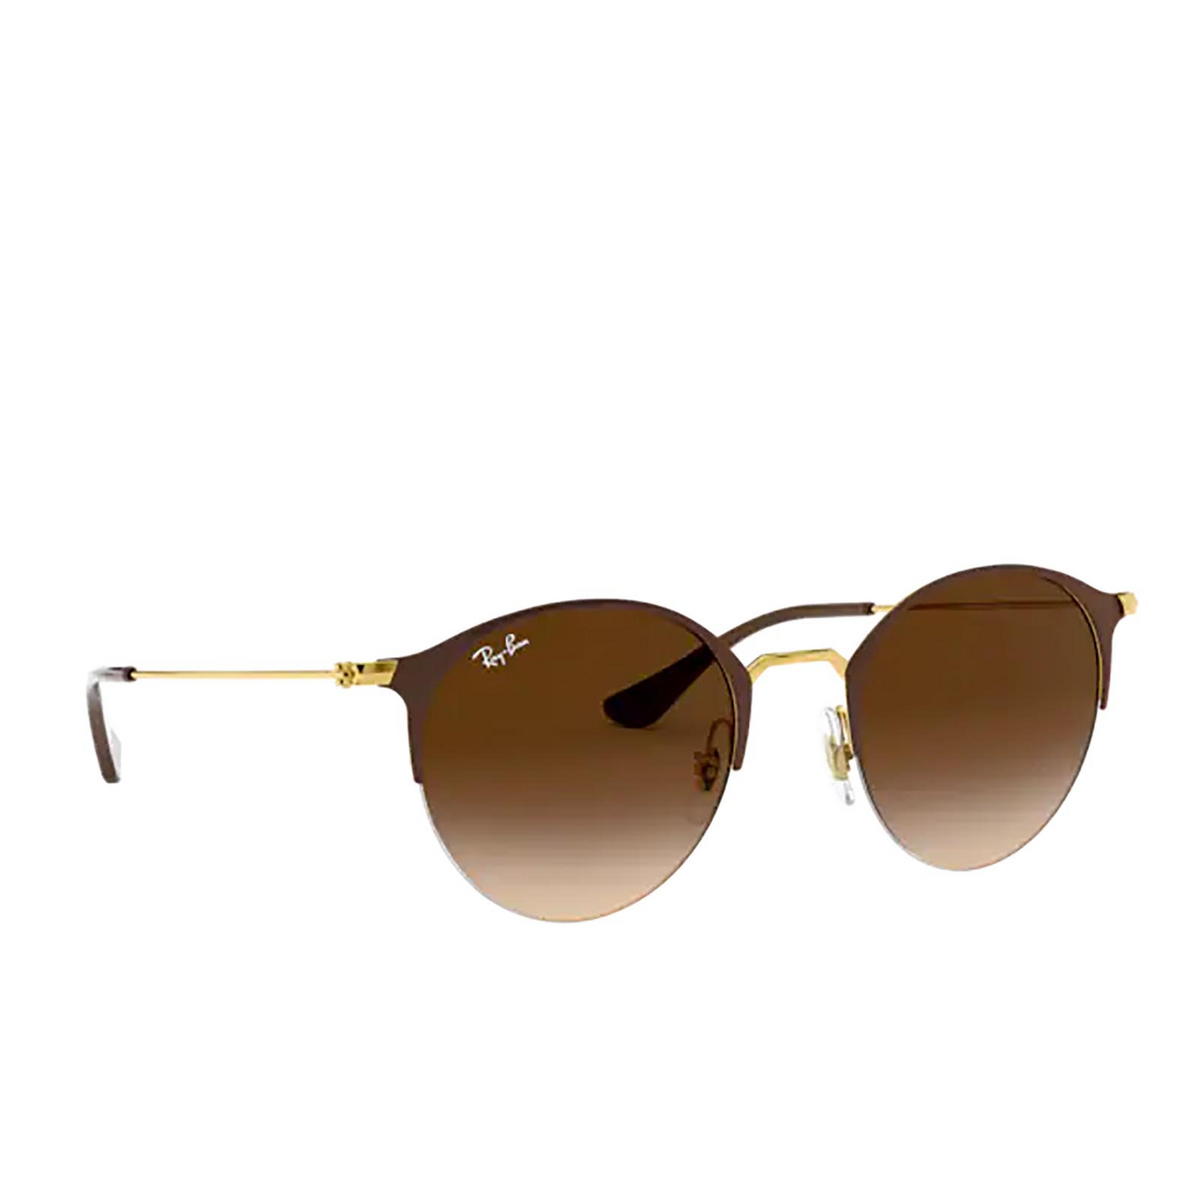 Ray-Ban RB3578 Sunglasses 900913 Gold Top Brown - three-quarters view